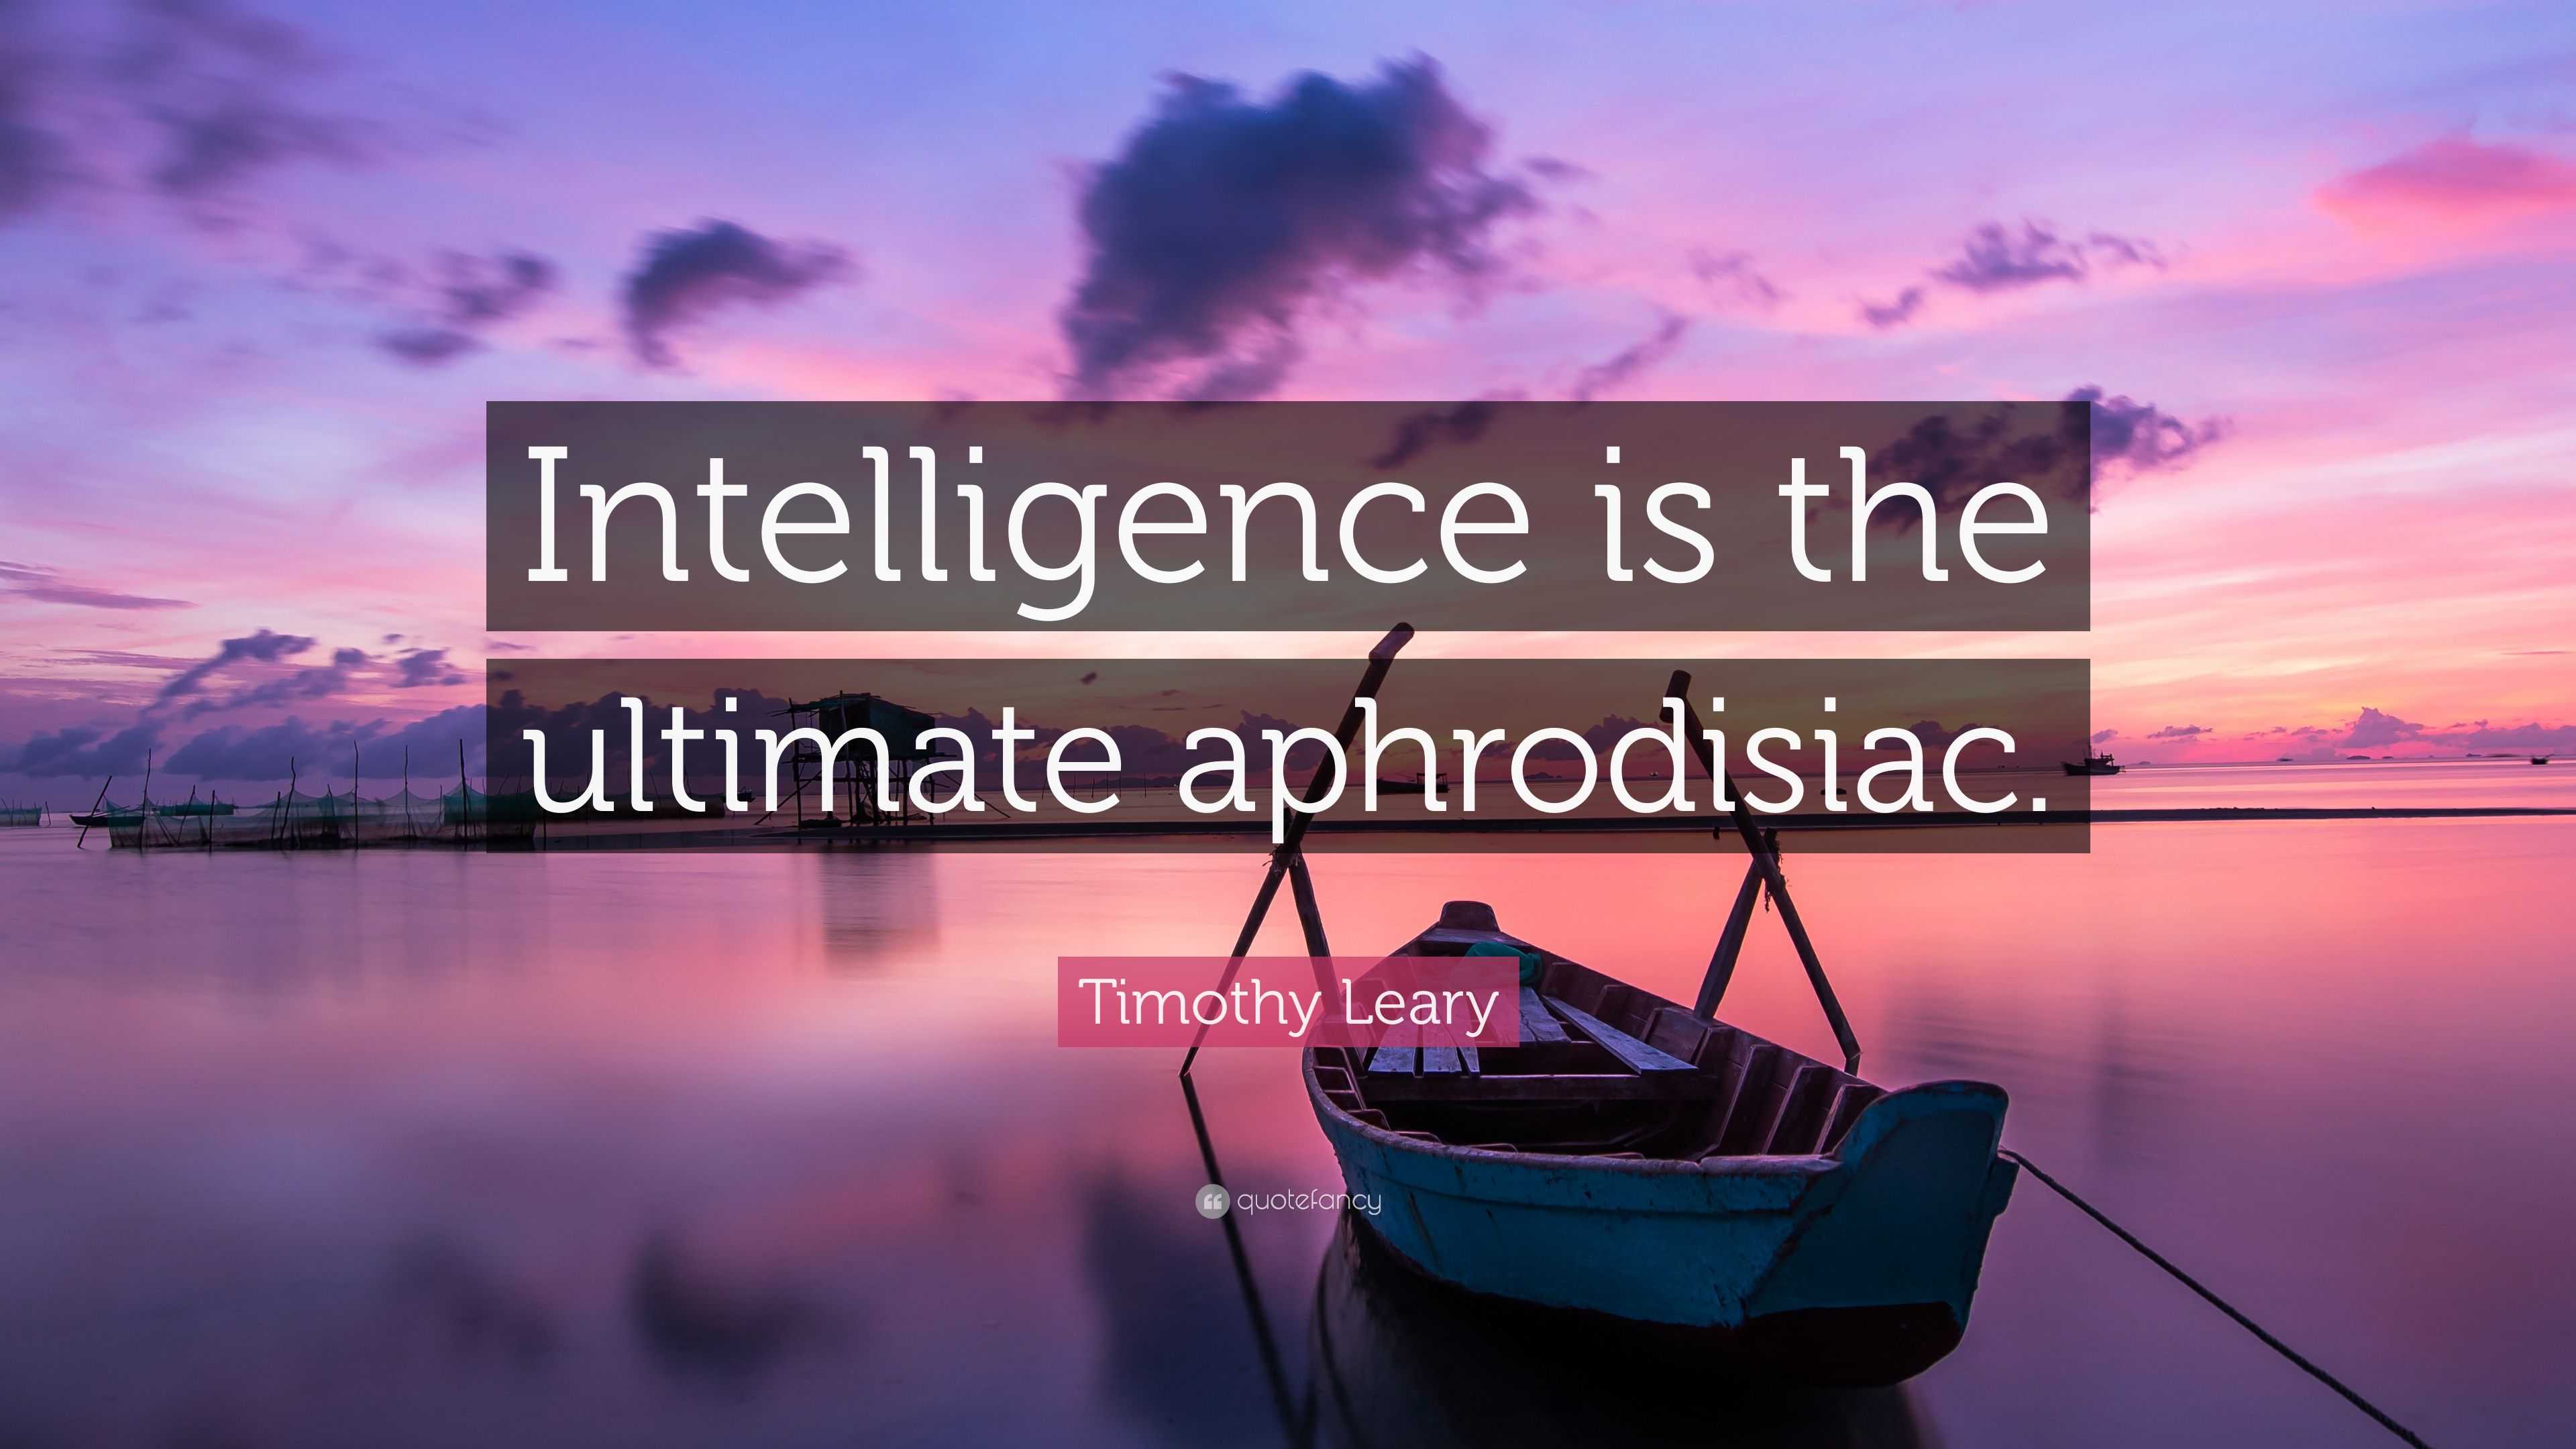 timothy-leary-quote-intelligence-is-the-ultimate-aphrodisiac